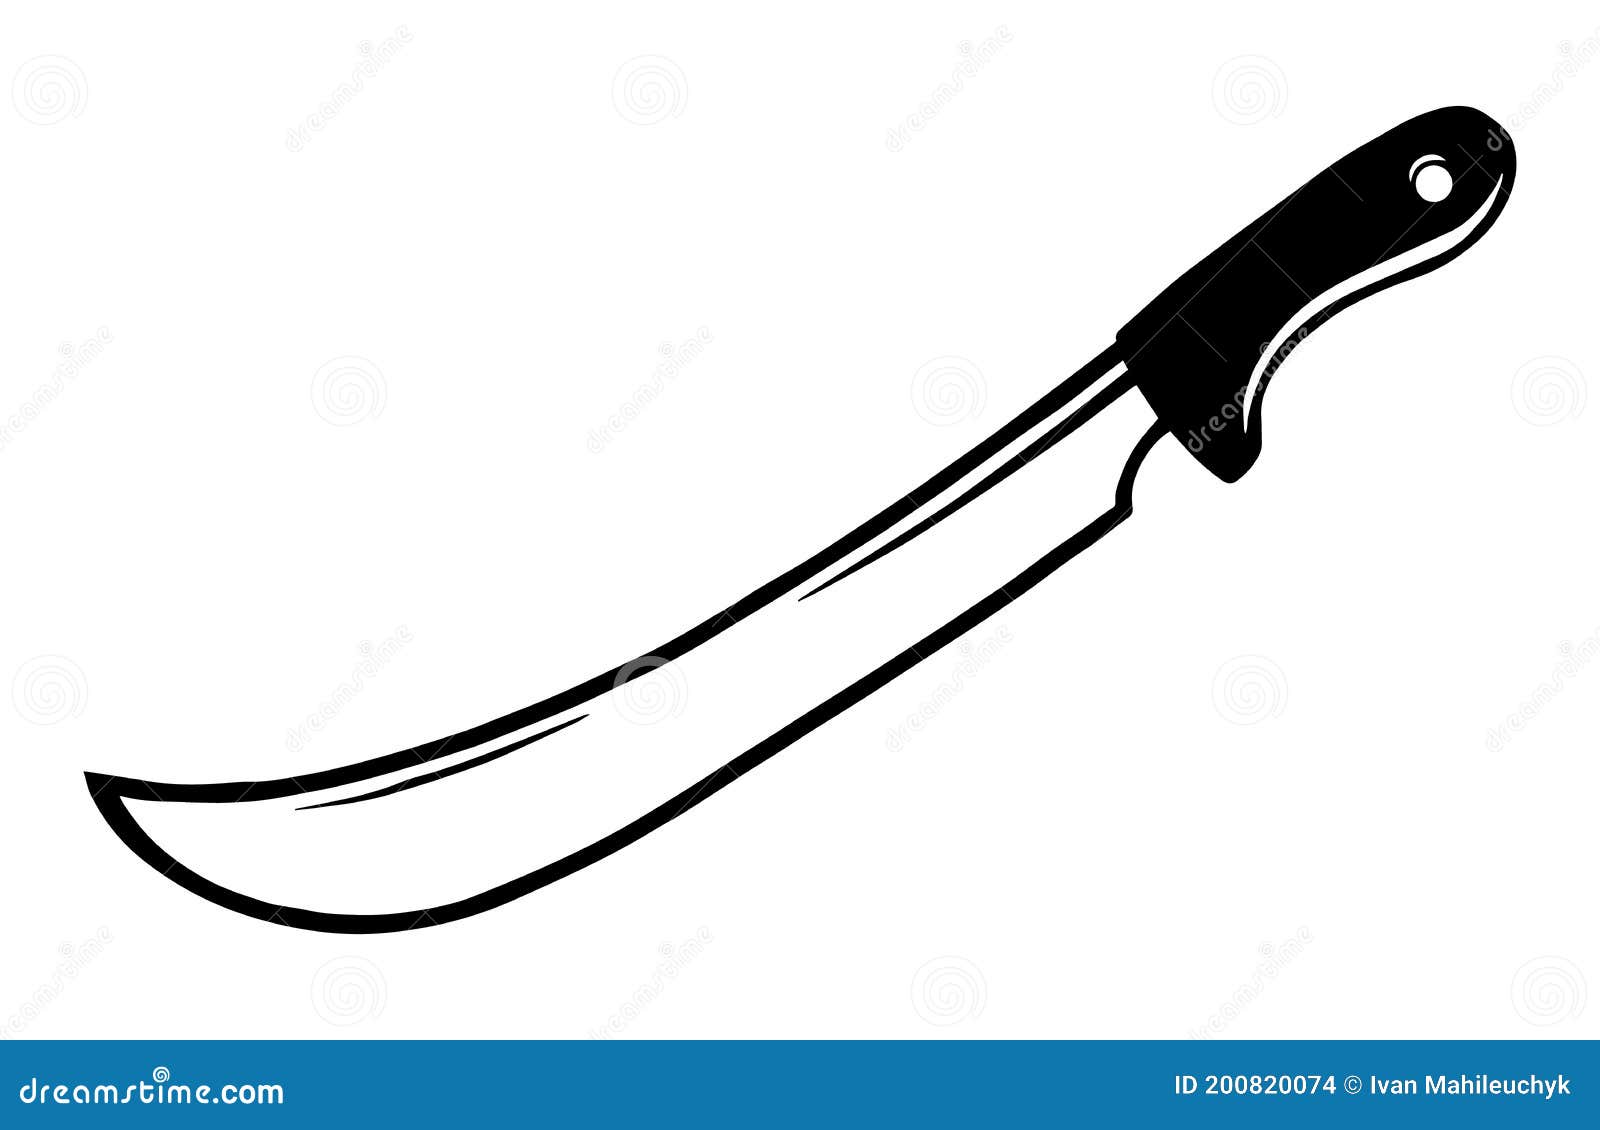 Types Of Knives Machetes Stock Illustration  Download Image Now  Cut Out  Design Illustration  iStock